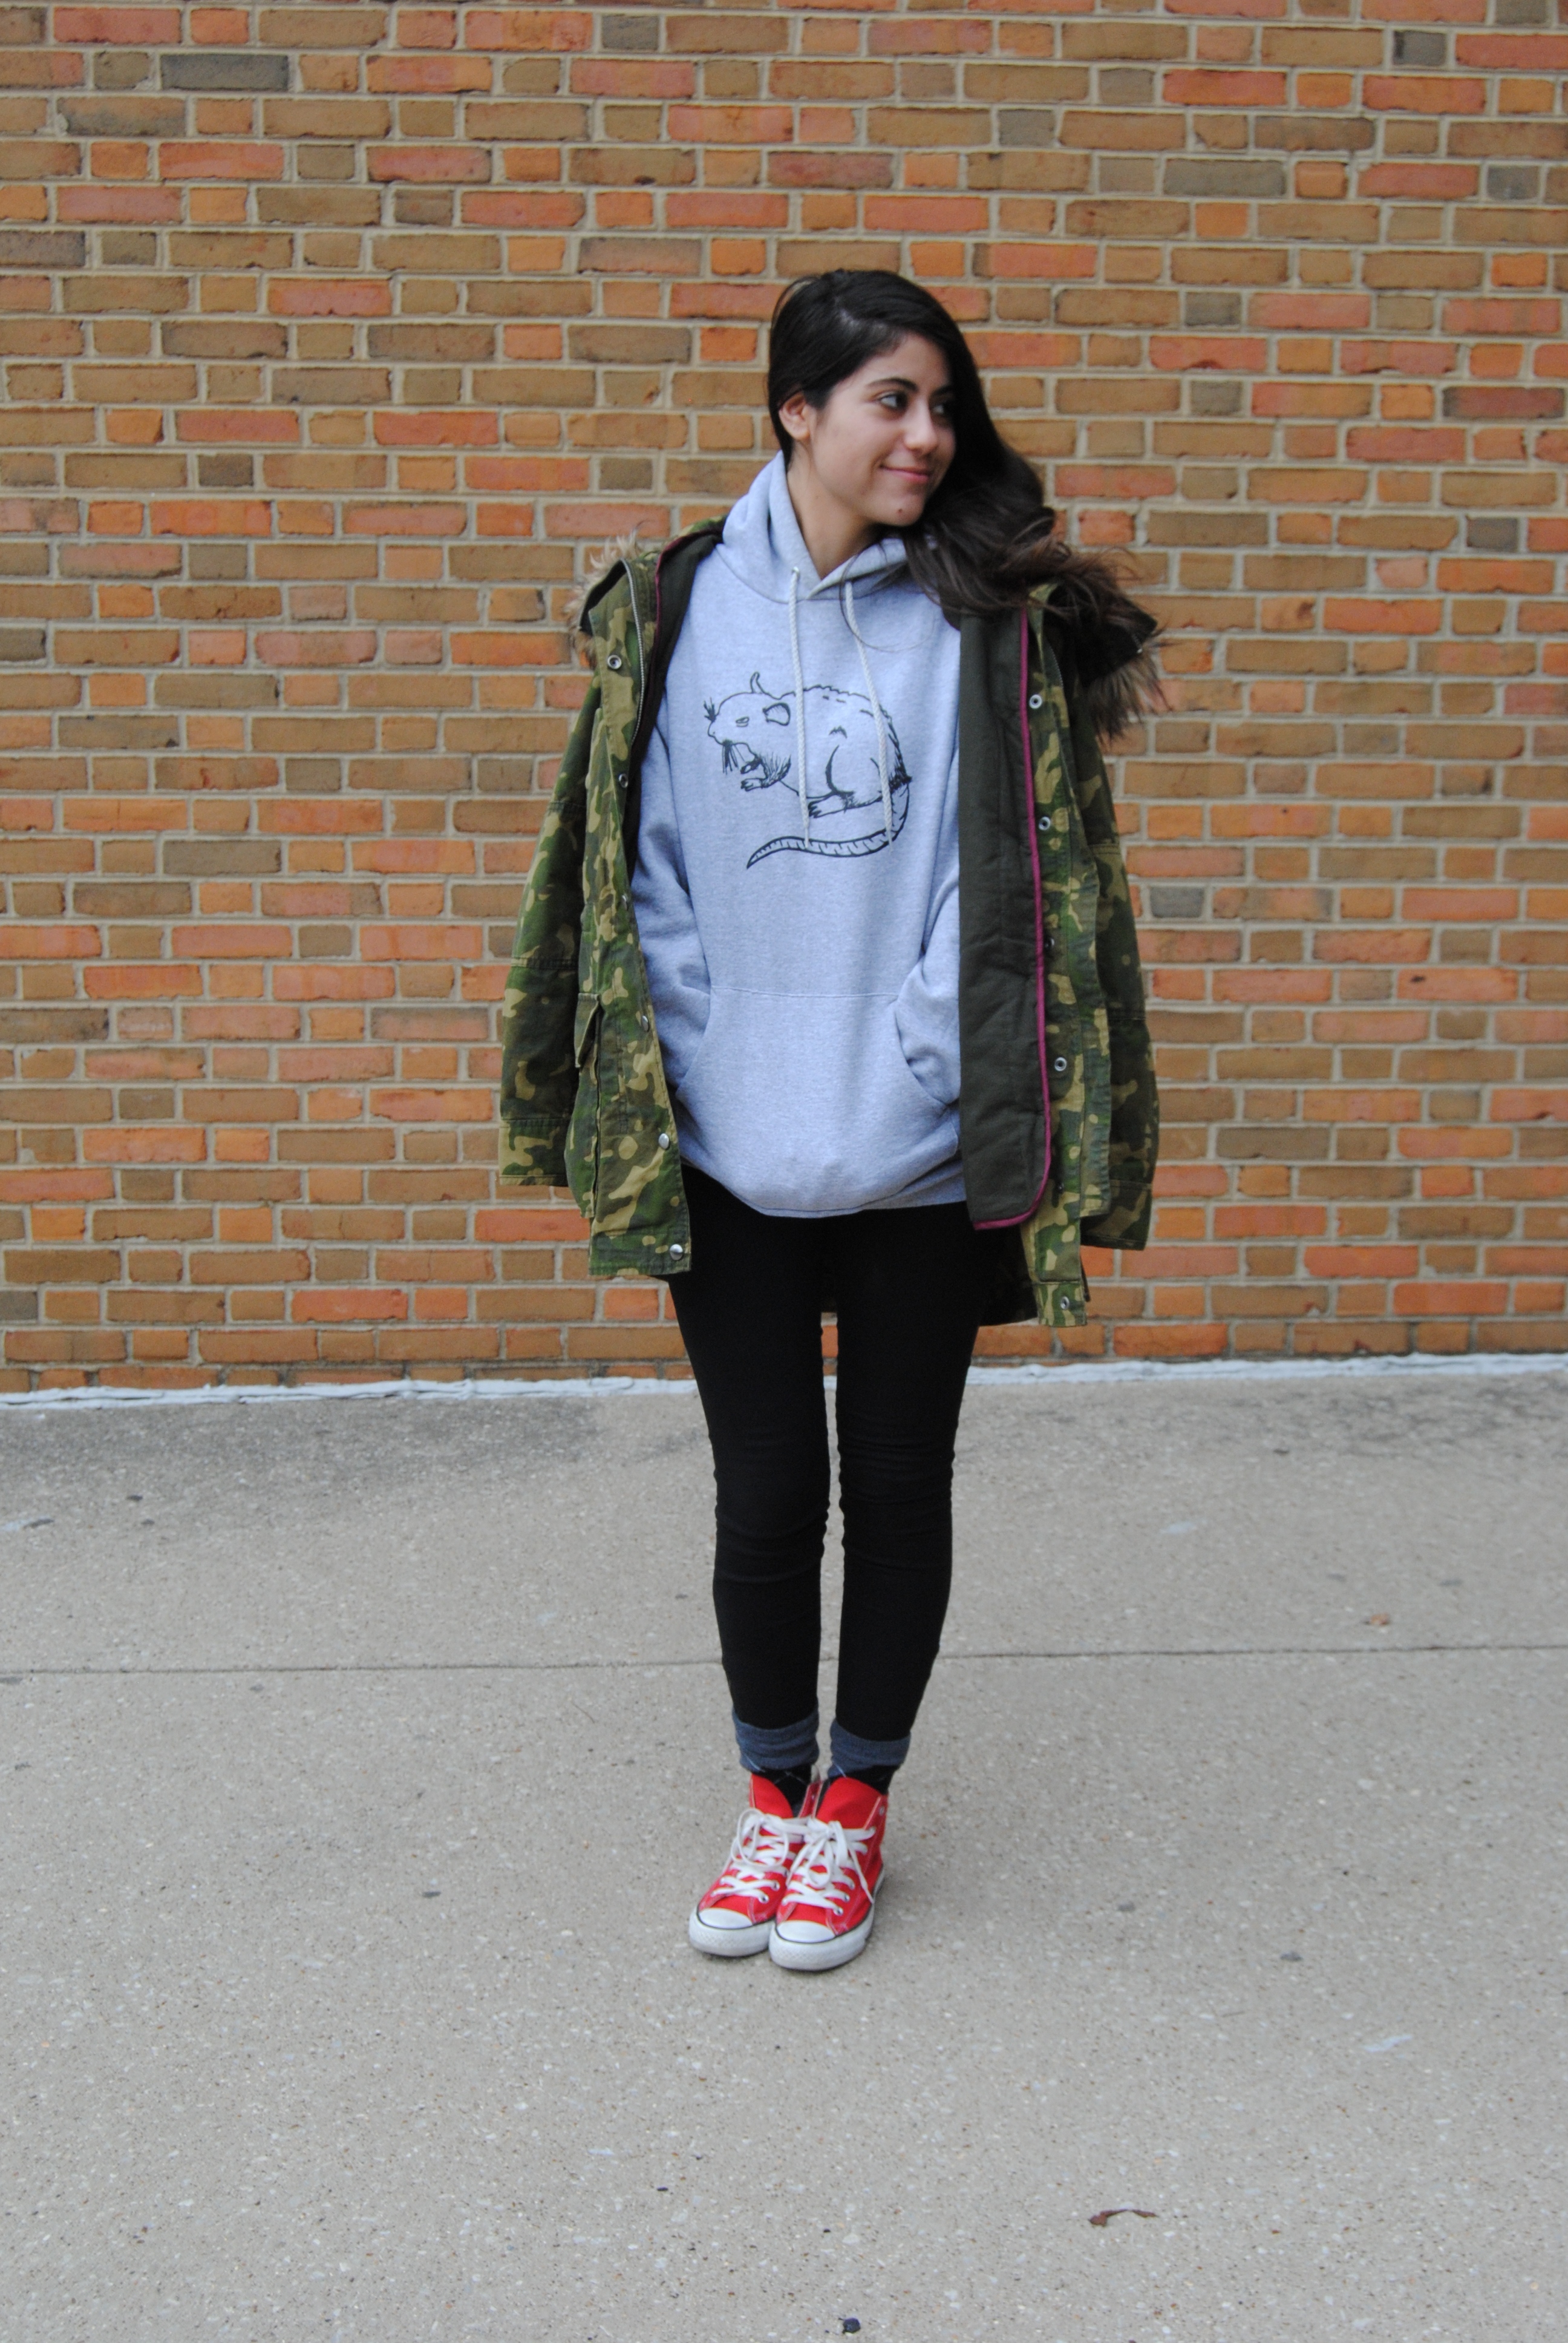 Sweater: Stray Rats, Jacket: Gap, Jeans: Forever 21, Shoes: Converse